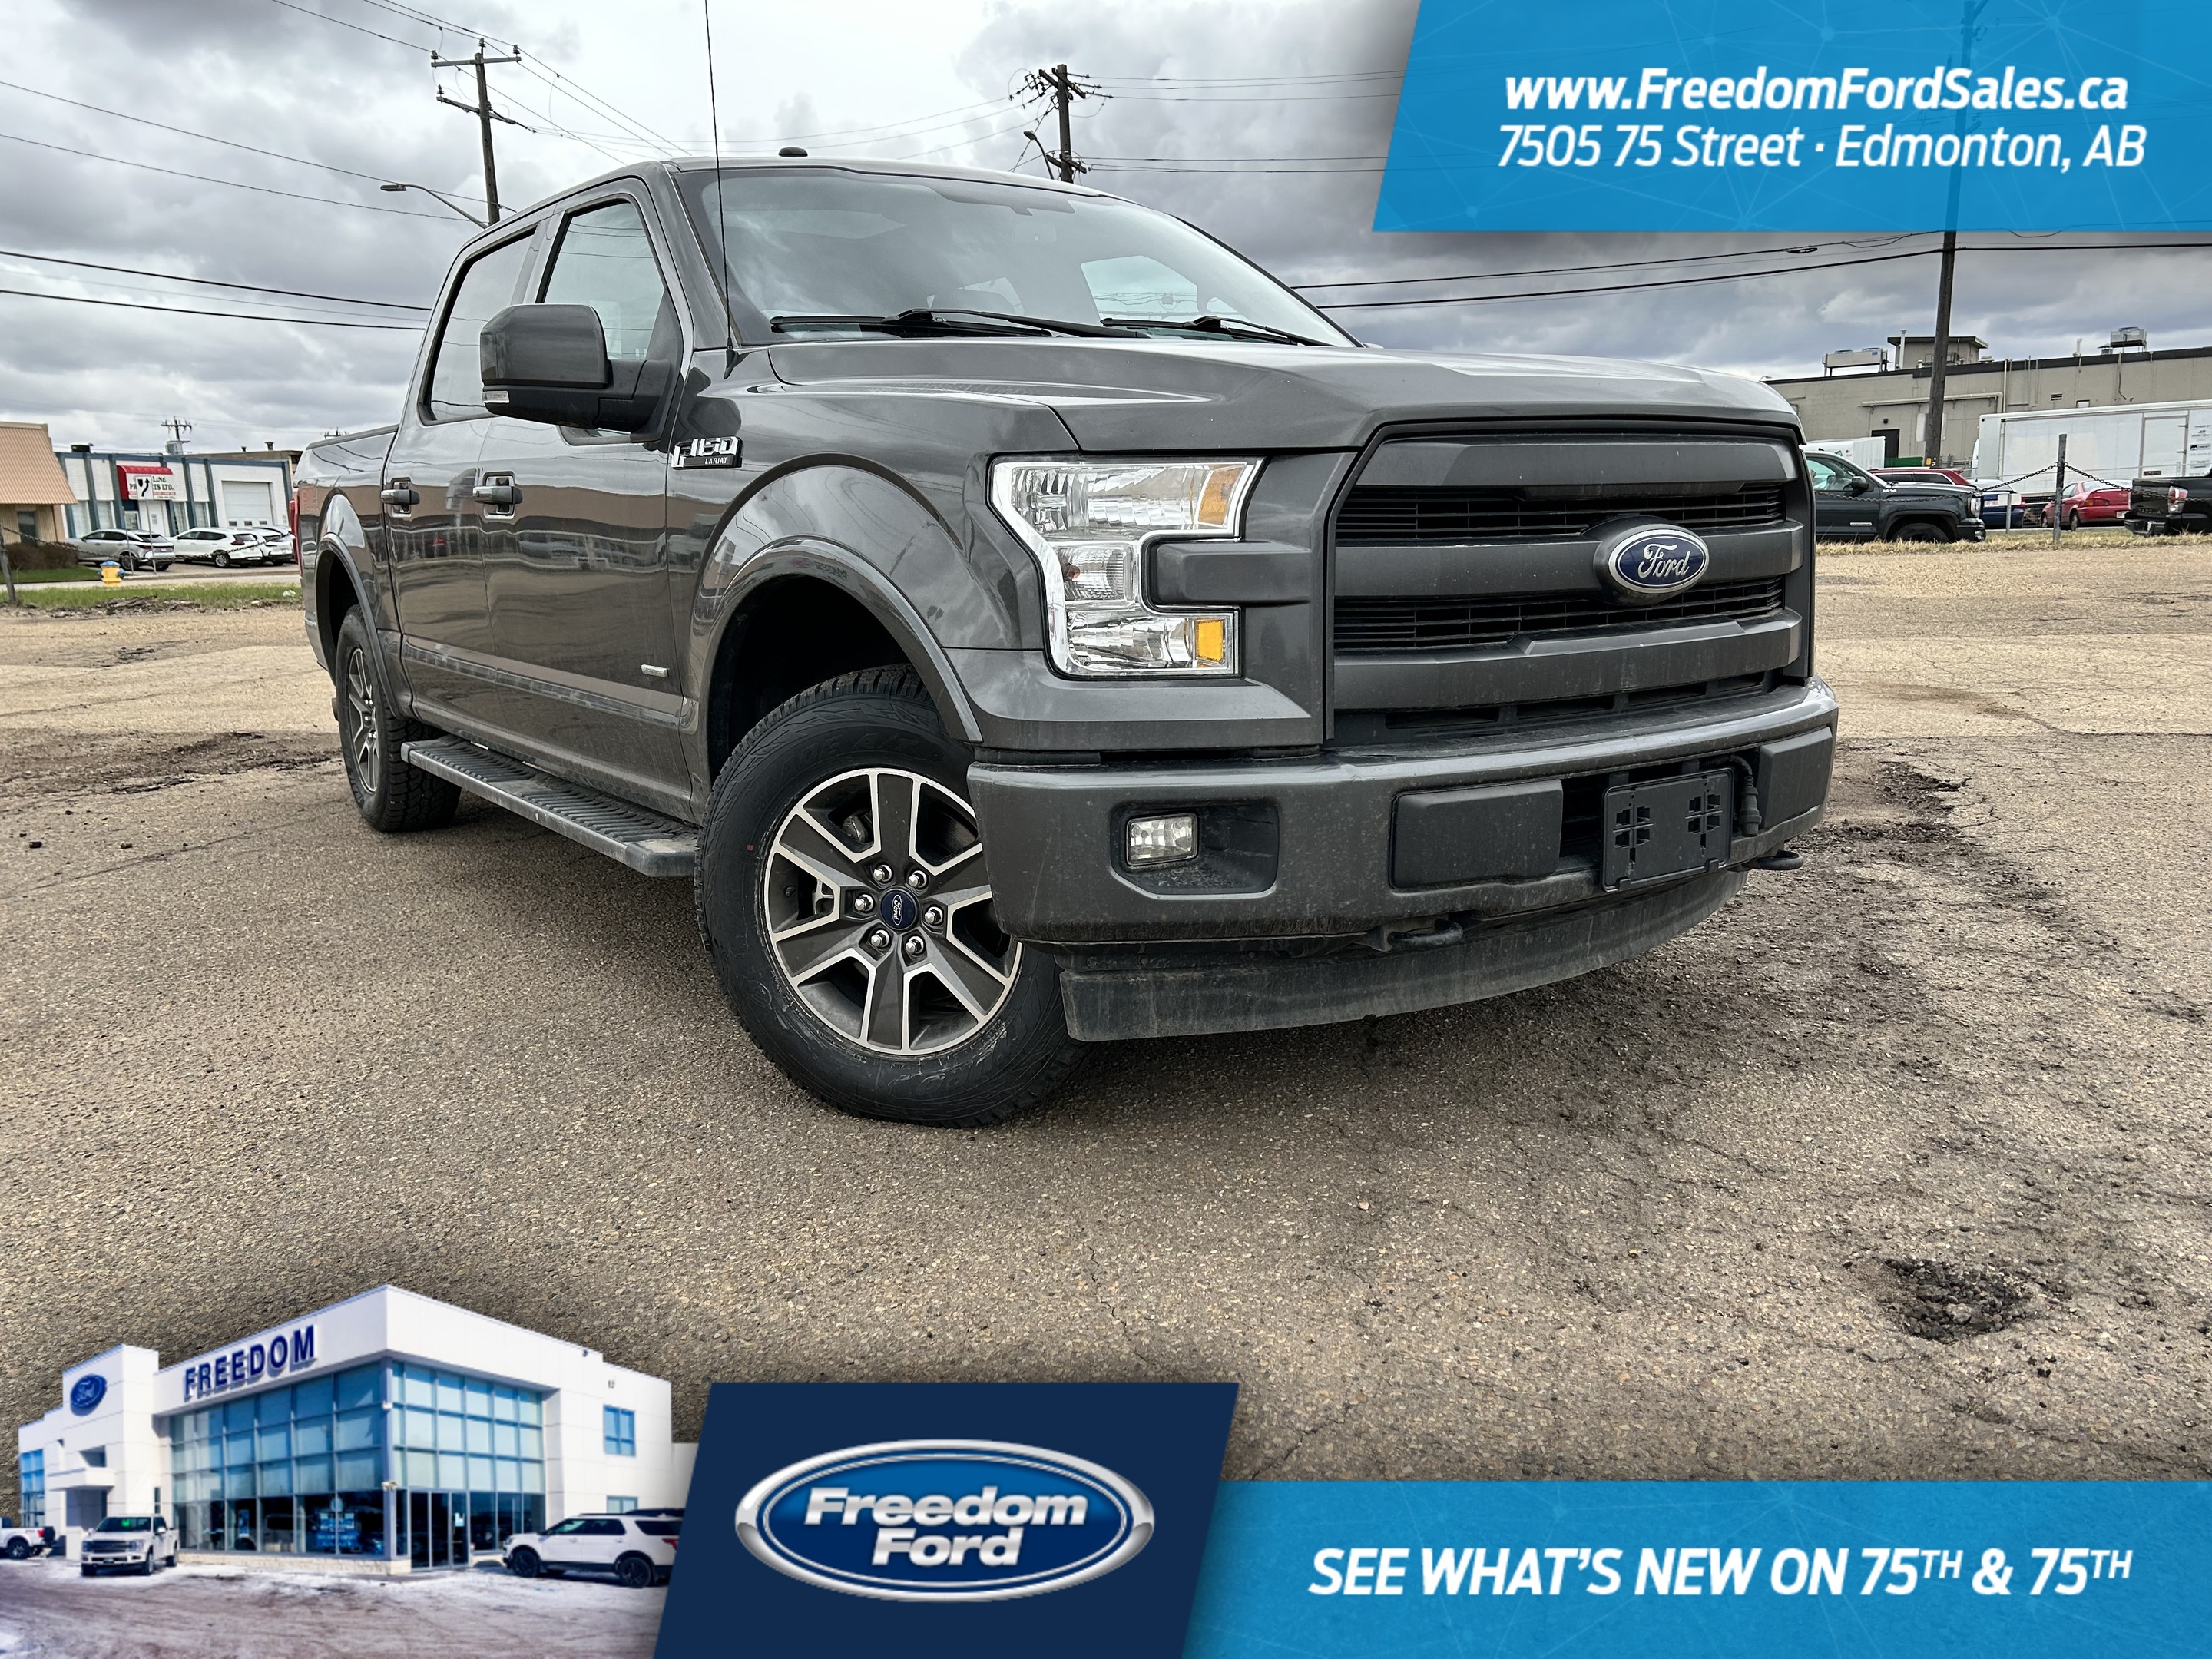 2017 Ford F-150 Lariat SuperCrew 145 | Rear Cam | Moonroof | SYNC 